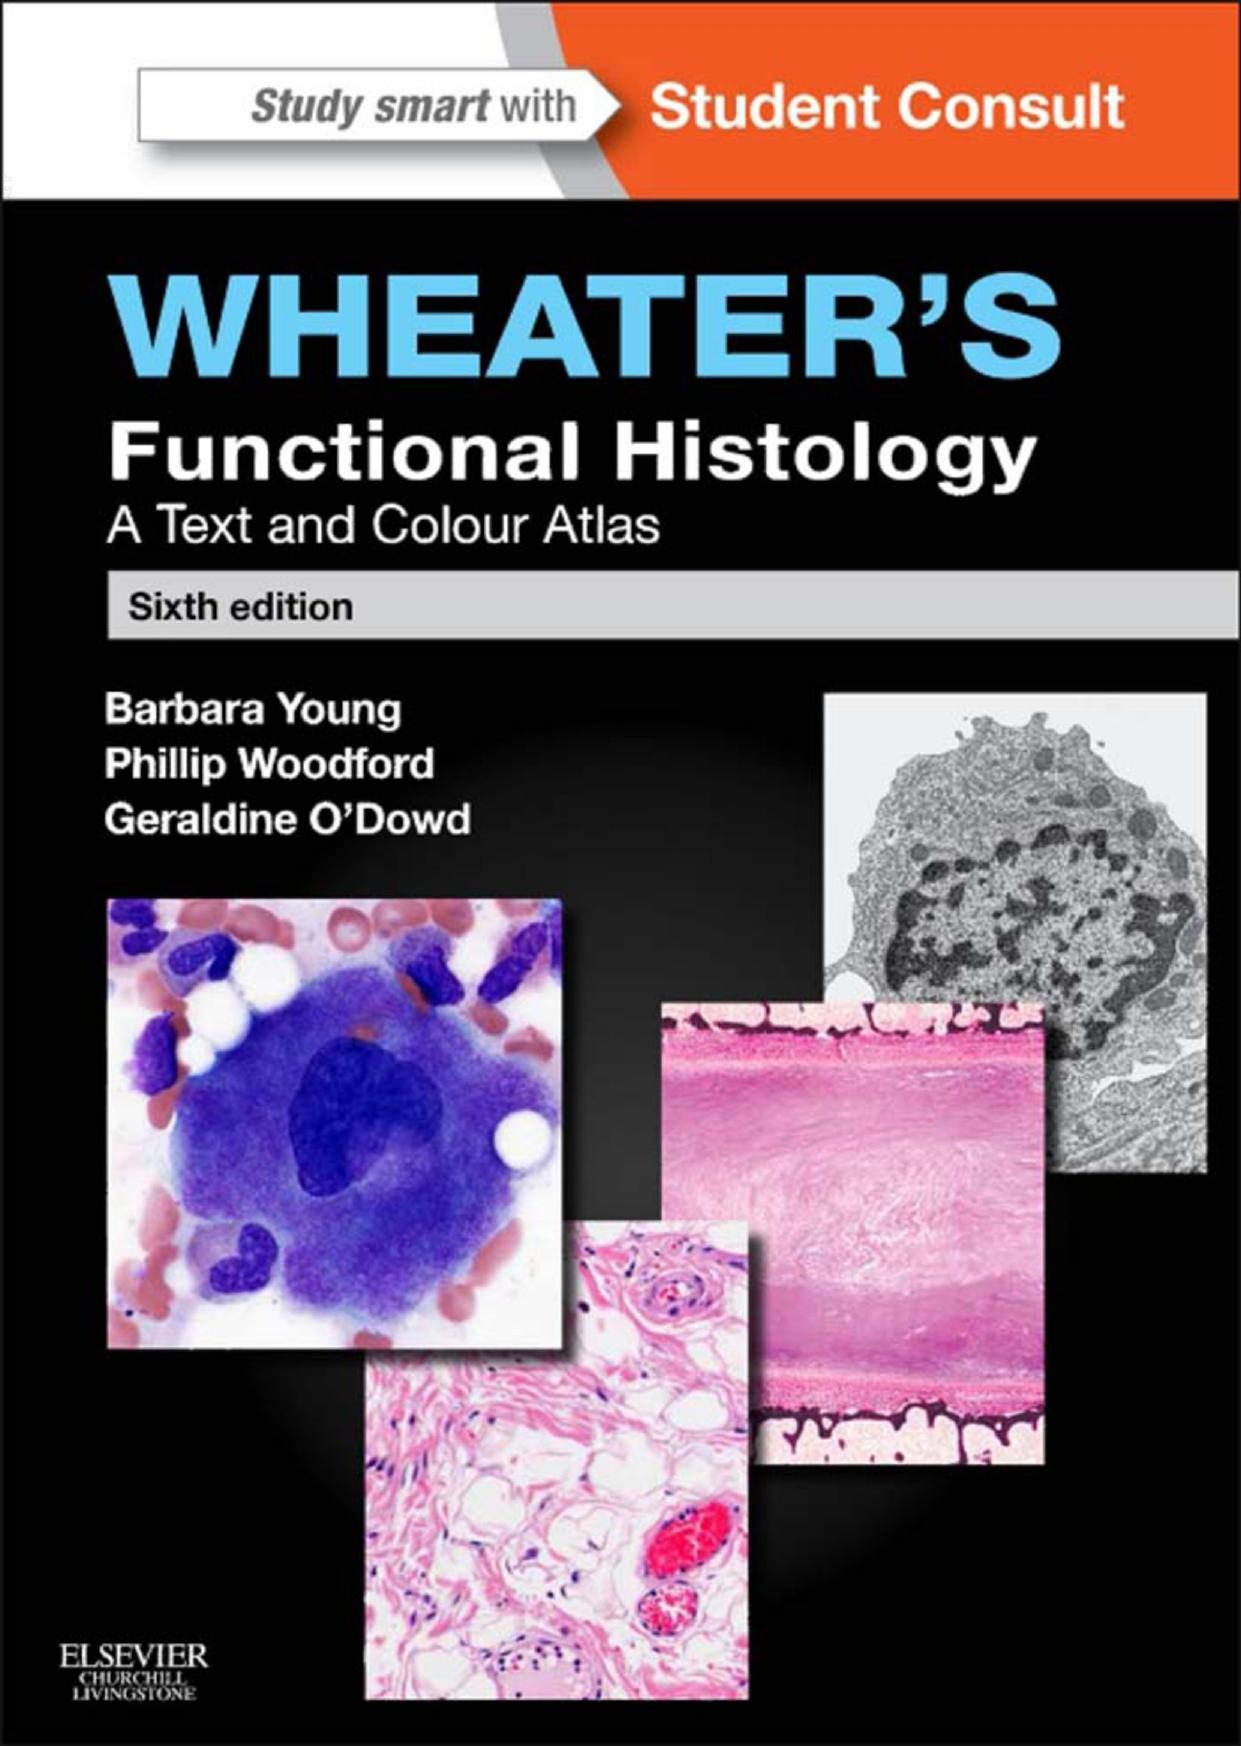 Wheater’s Functional Histology, A Text and Colour Atlas, 6th Edition